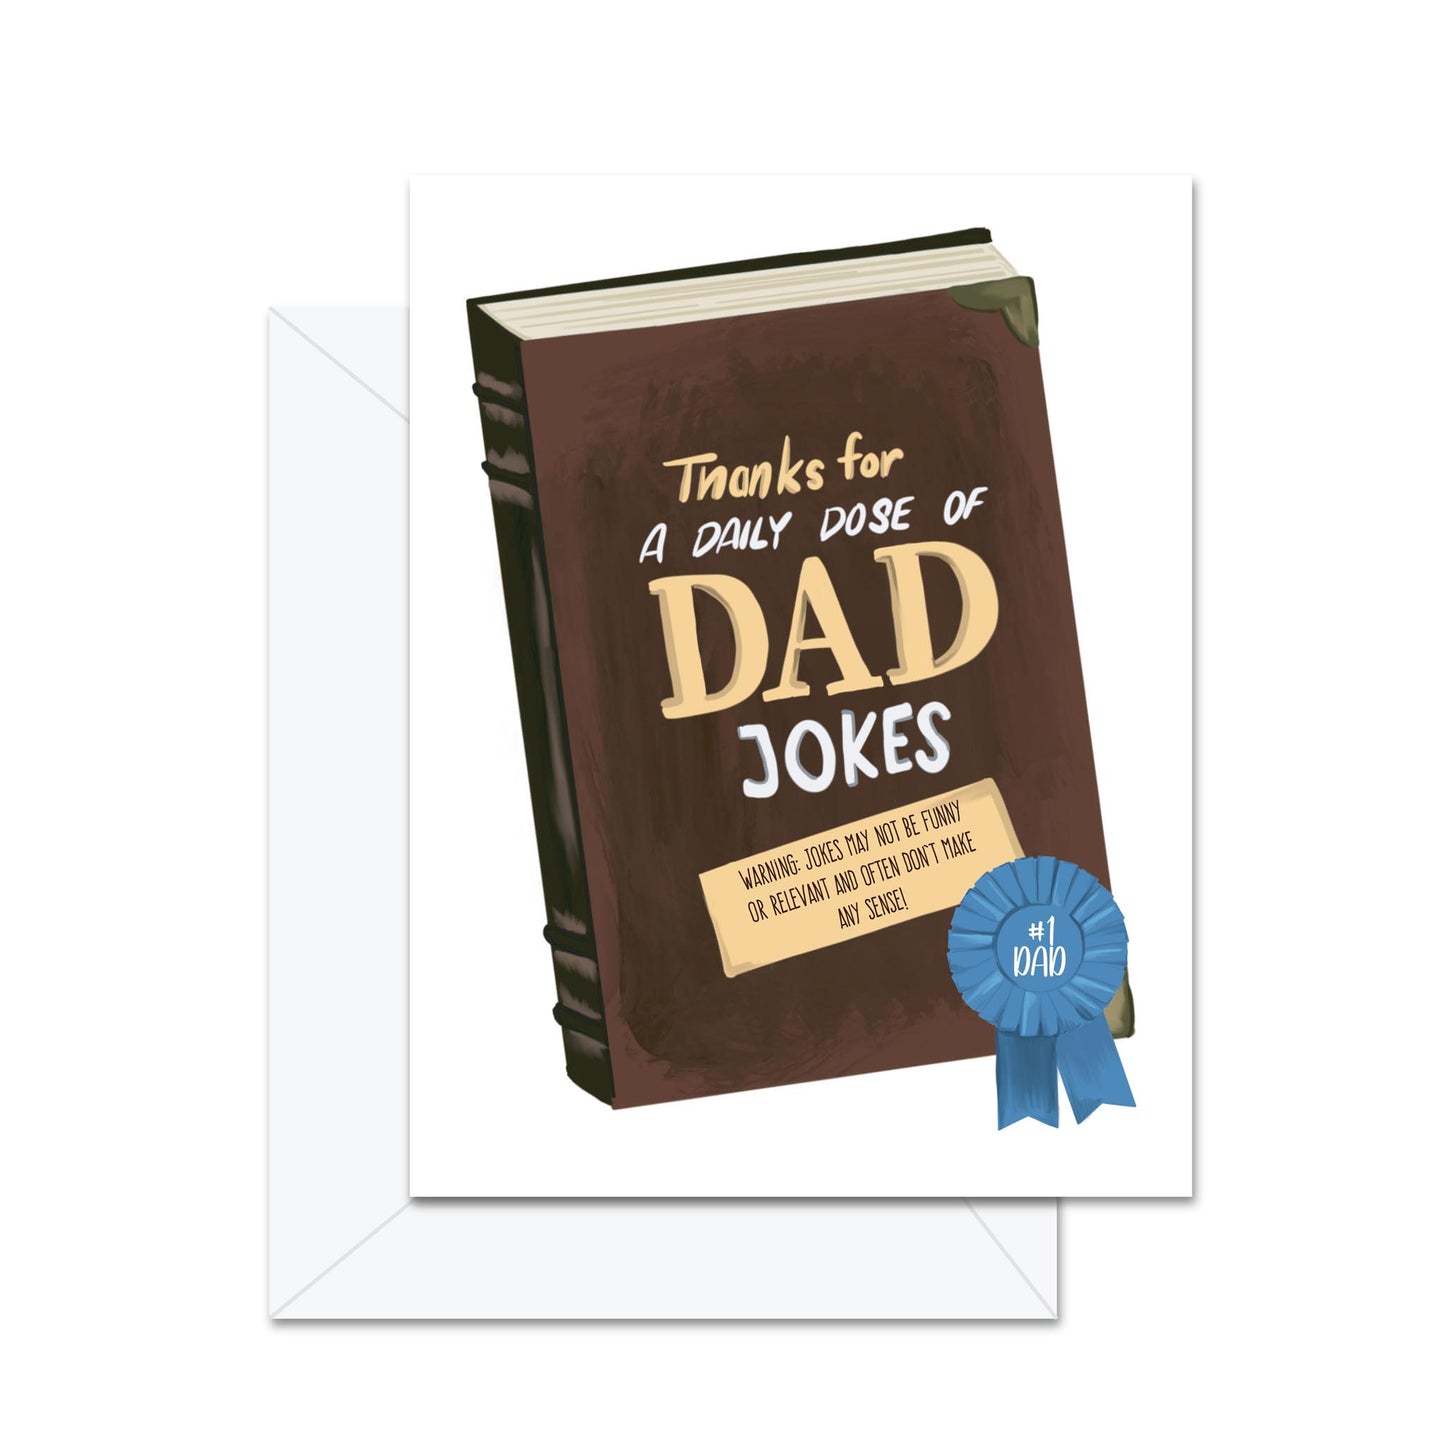 Thanks For A Daily Dose Of Dad Jokes! - Greeting Card